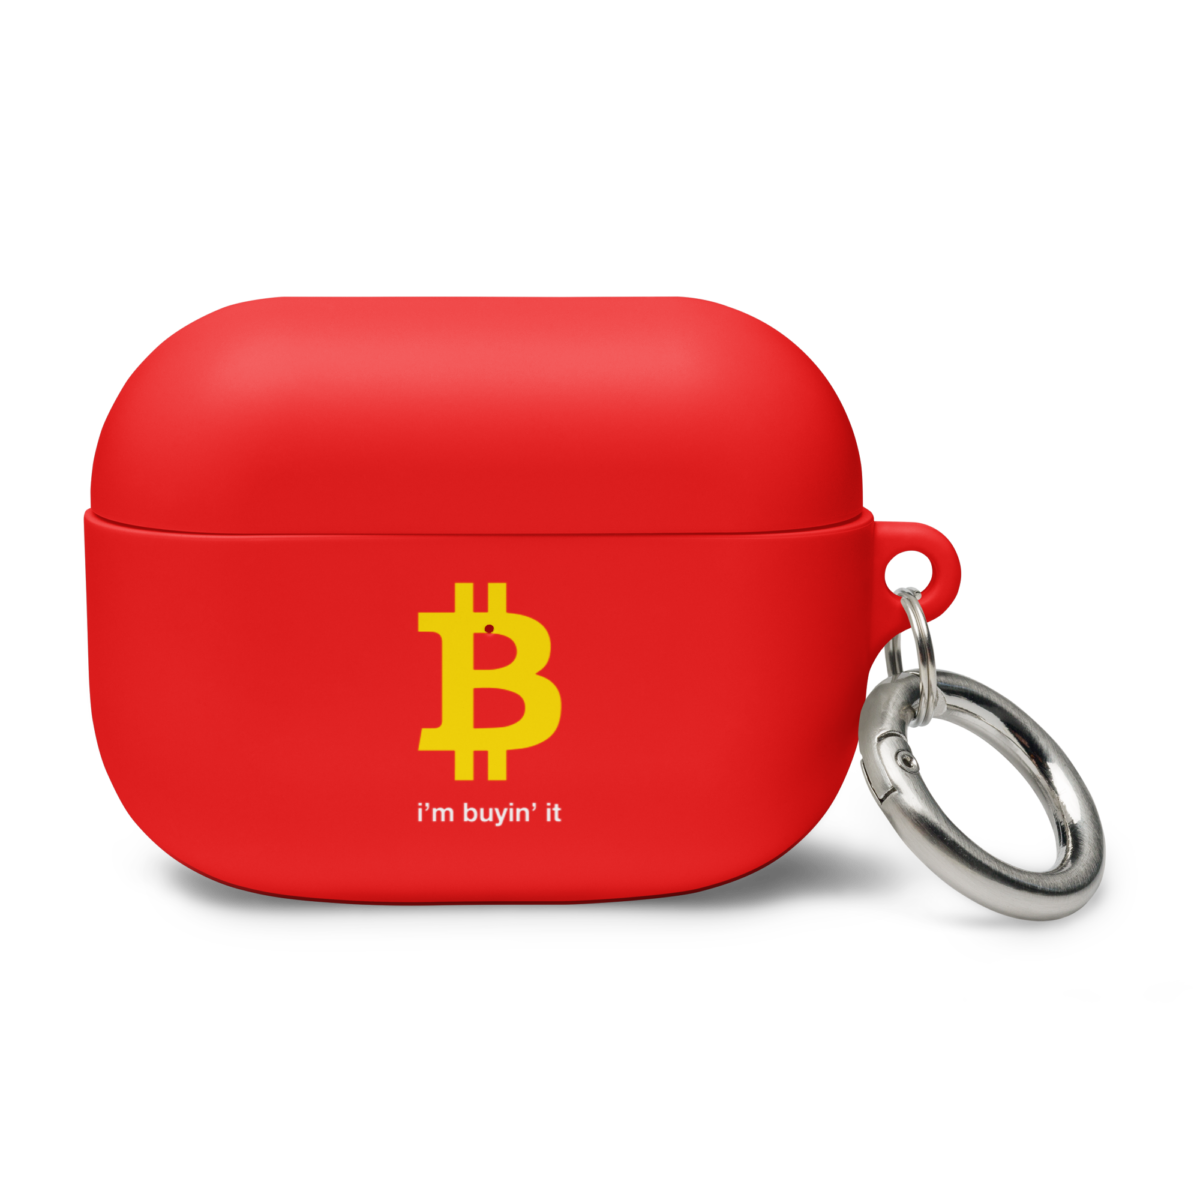 airpods case red airpods pro front 62e1a7eac4ed0 - Bitcoin: I'm Buyin' It AirPods Case